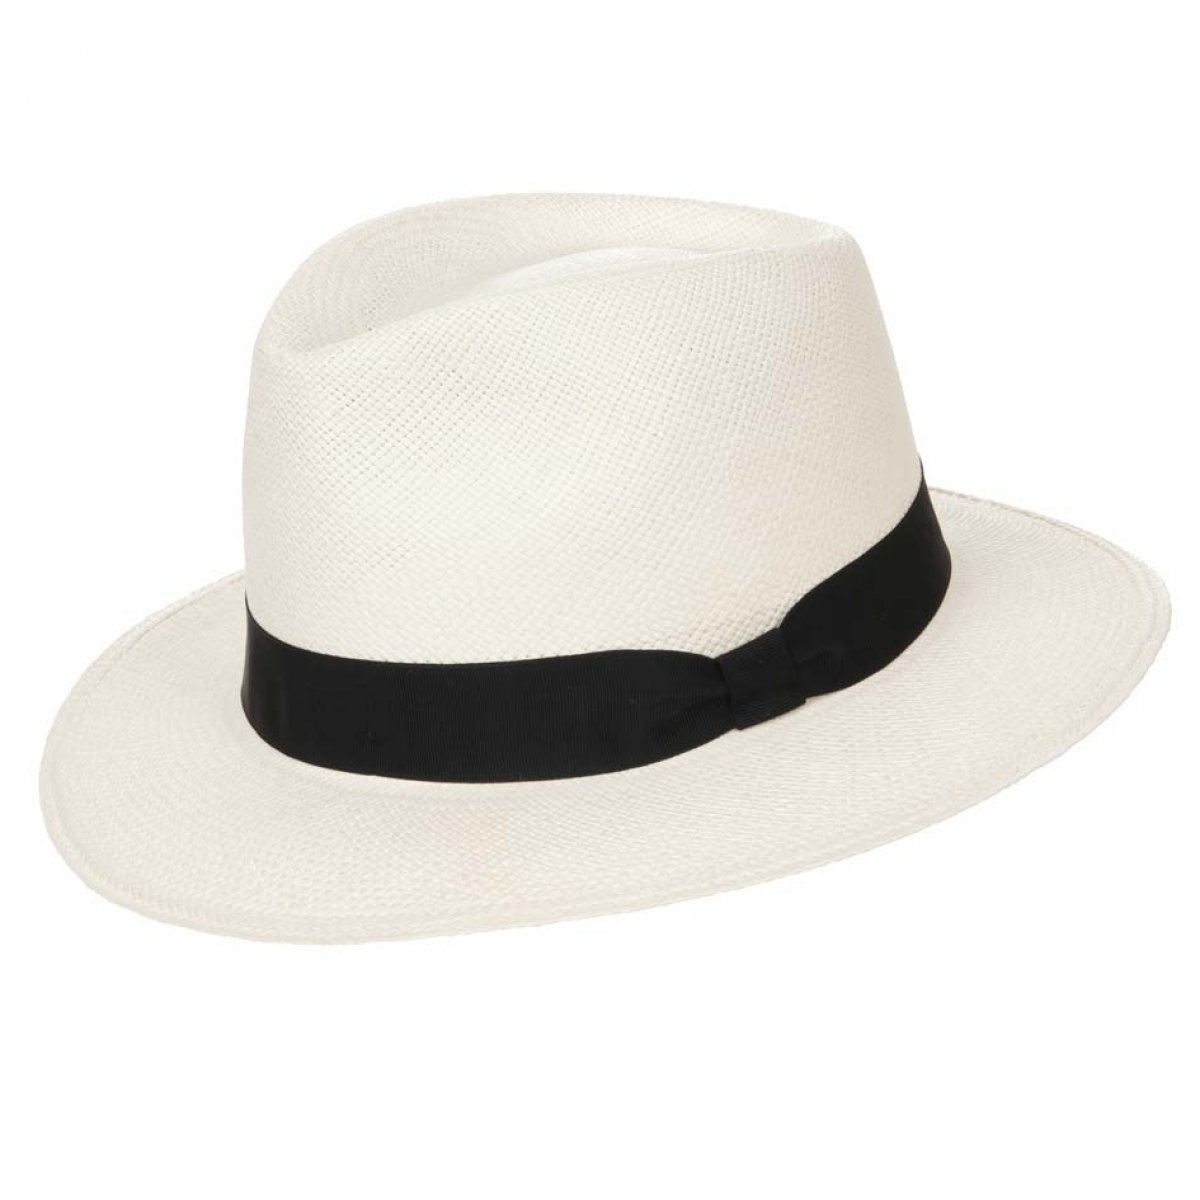 panamahat Quito traveller with wide brim --> Online Hatshop for hats ...